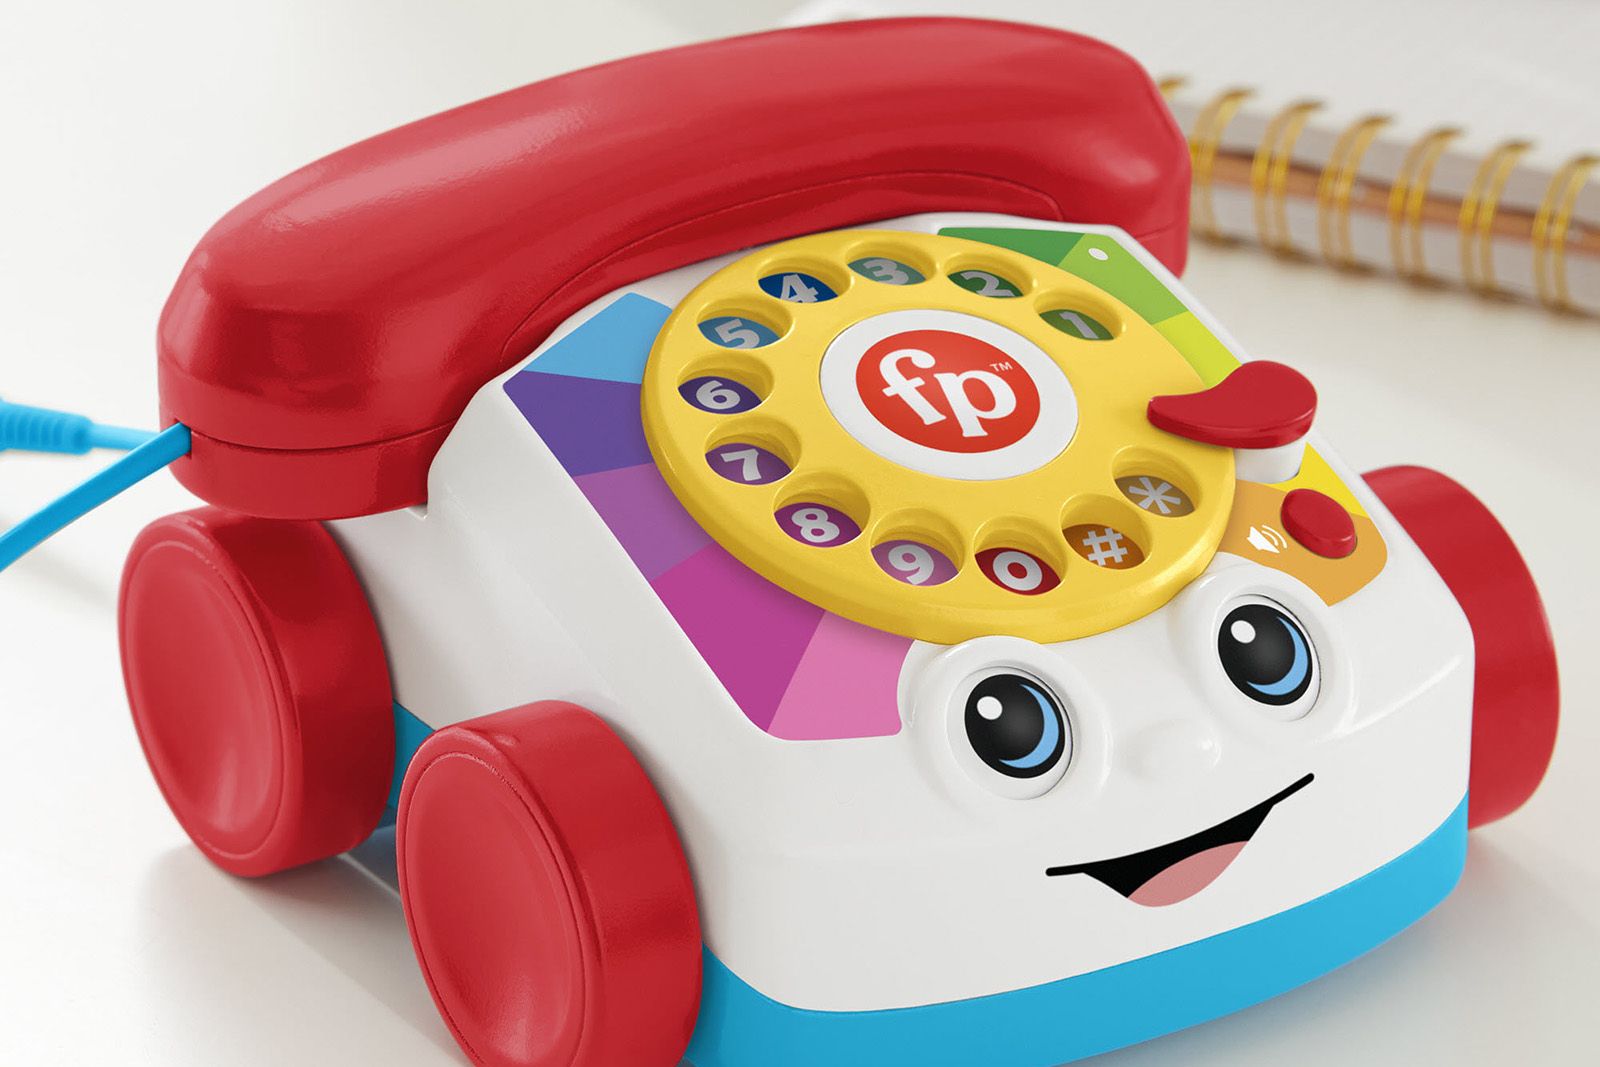 You can now get a Fisher-Price Chatter toy telephone that actually works photo 1